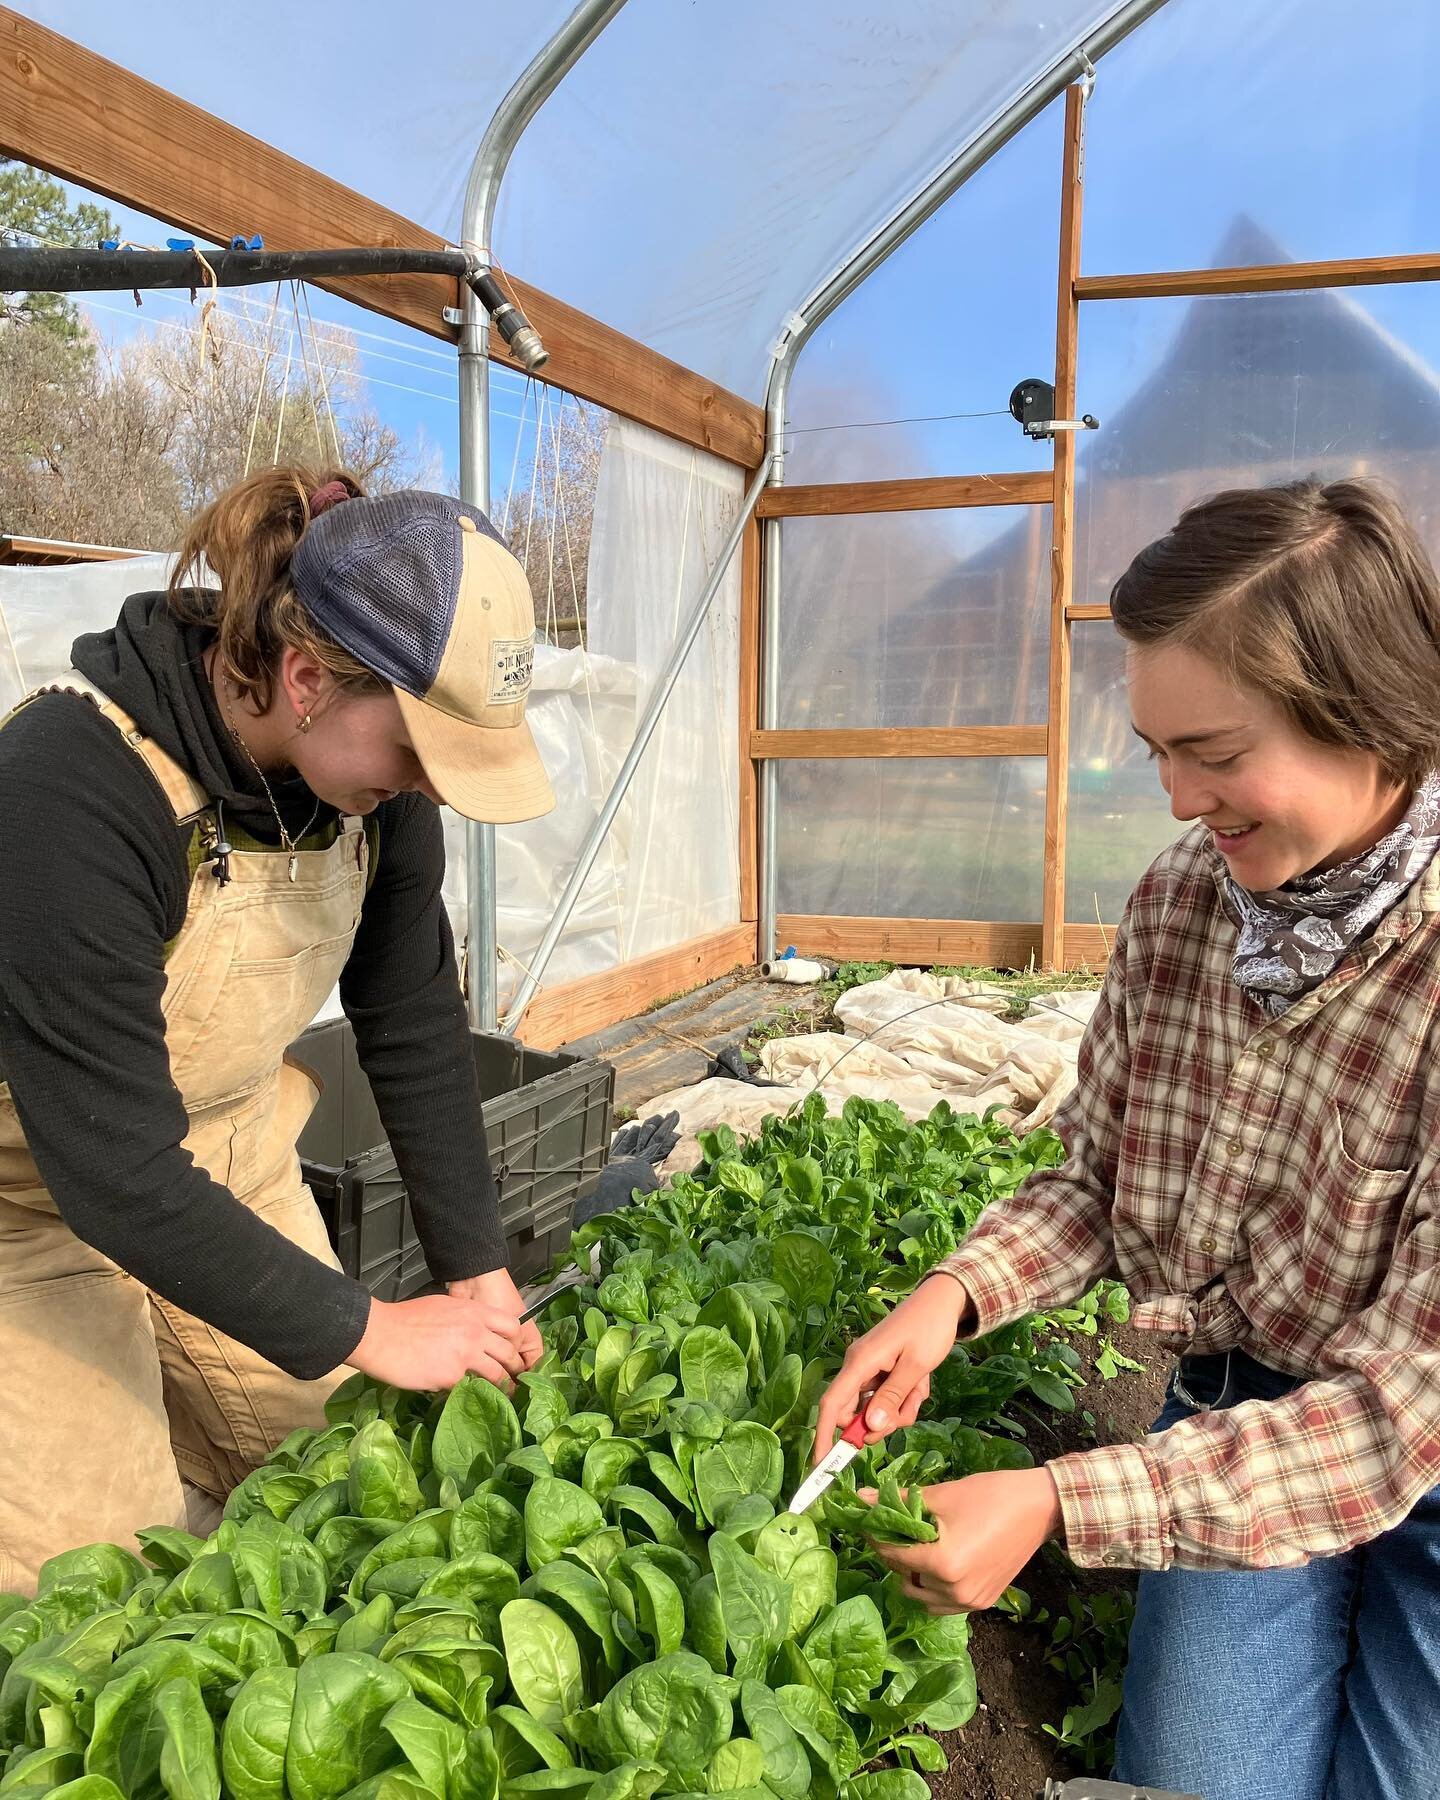 We&rsquo;ve been a little quiet over here lately (due to a broken phone, classic Morgan), but we&rsquo;ve been very busy! Today we had our first harvest of the season. Find Long Table spinach and baby bok choy @sunnysidefarmsmarket and @durangonatura